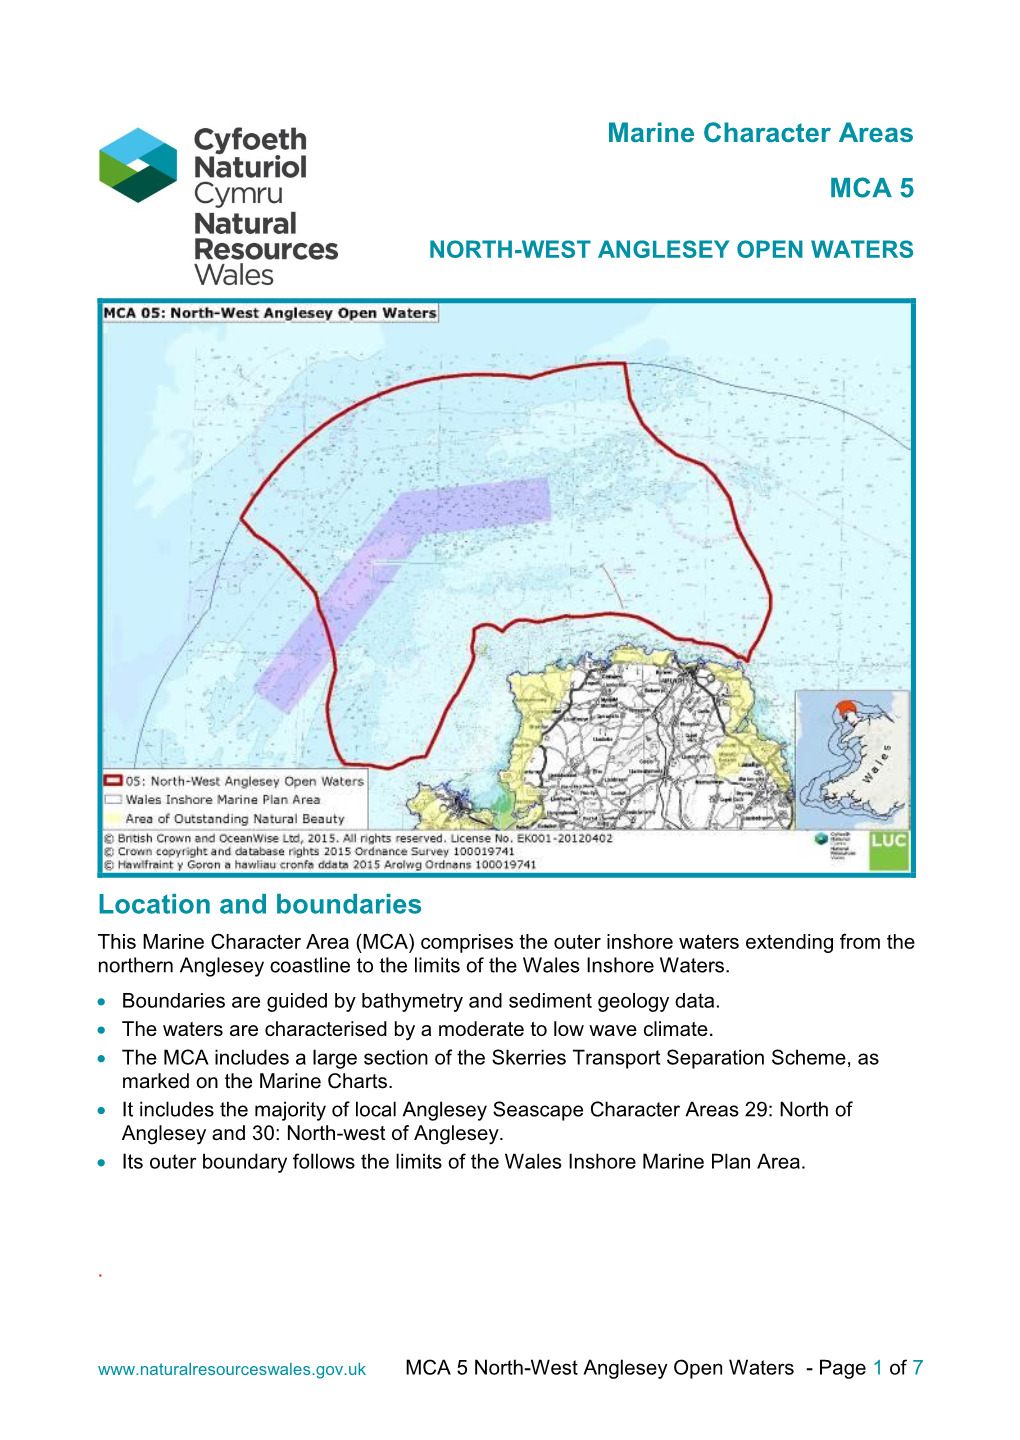 North-West Anglesey Open Waters